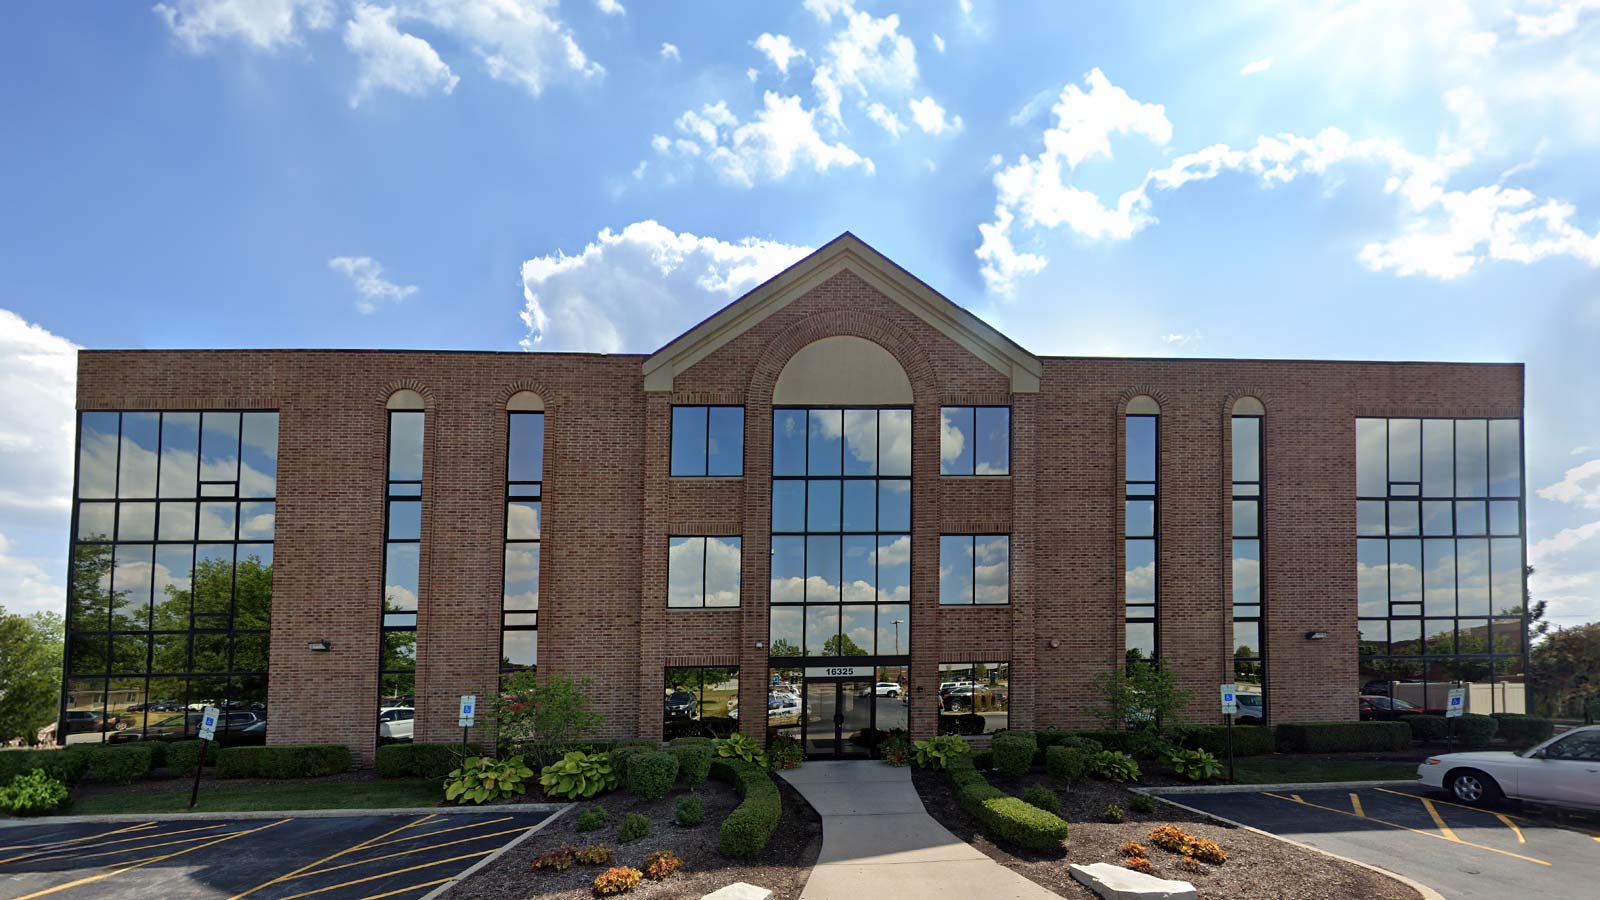 A symmetrical, brick office building with a central arched entrance and large reflective windows, under a blue sky.